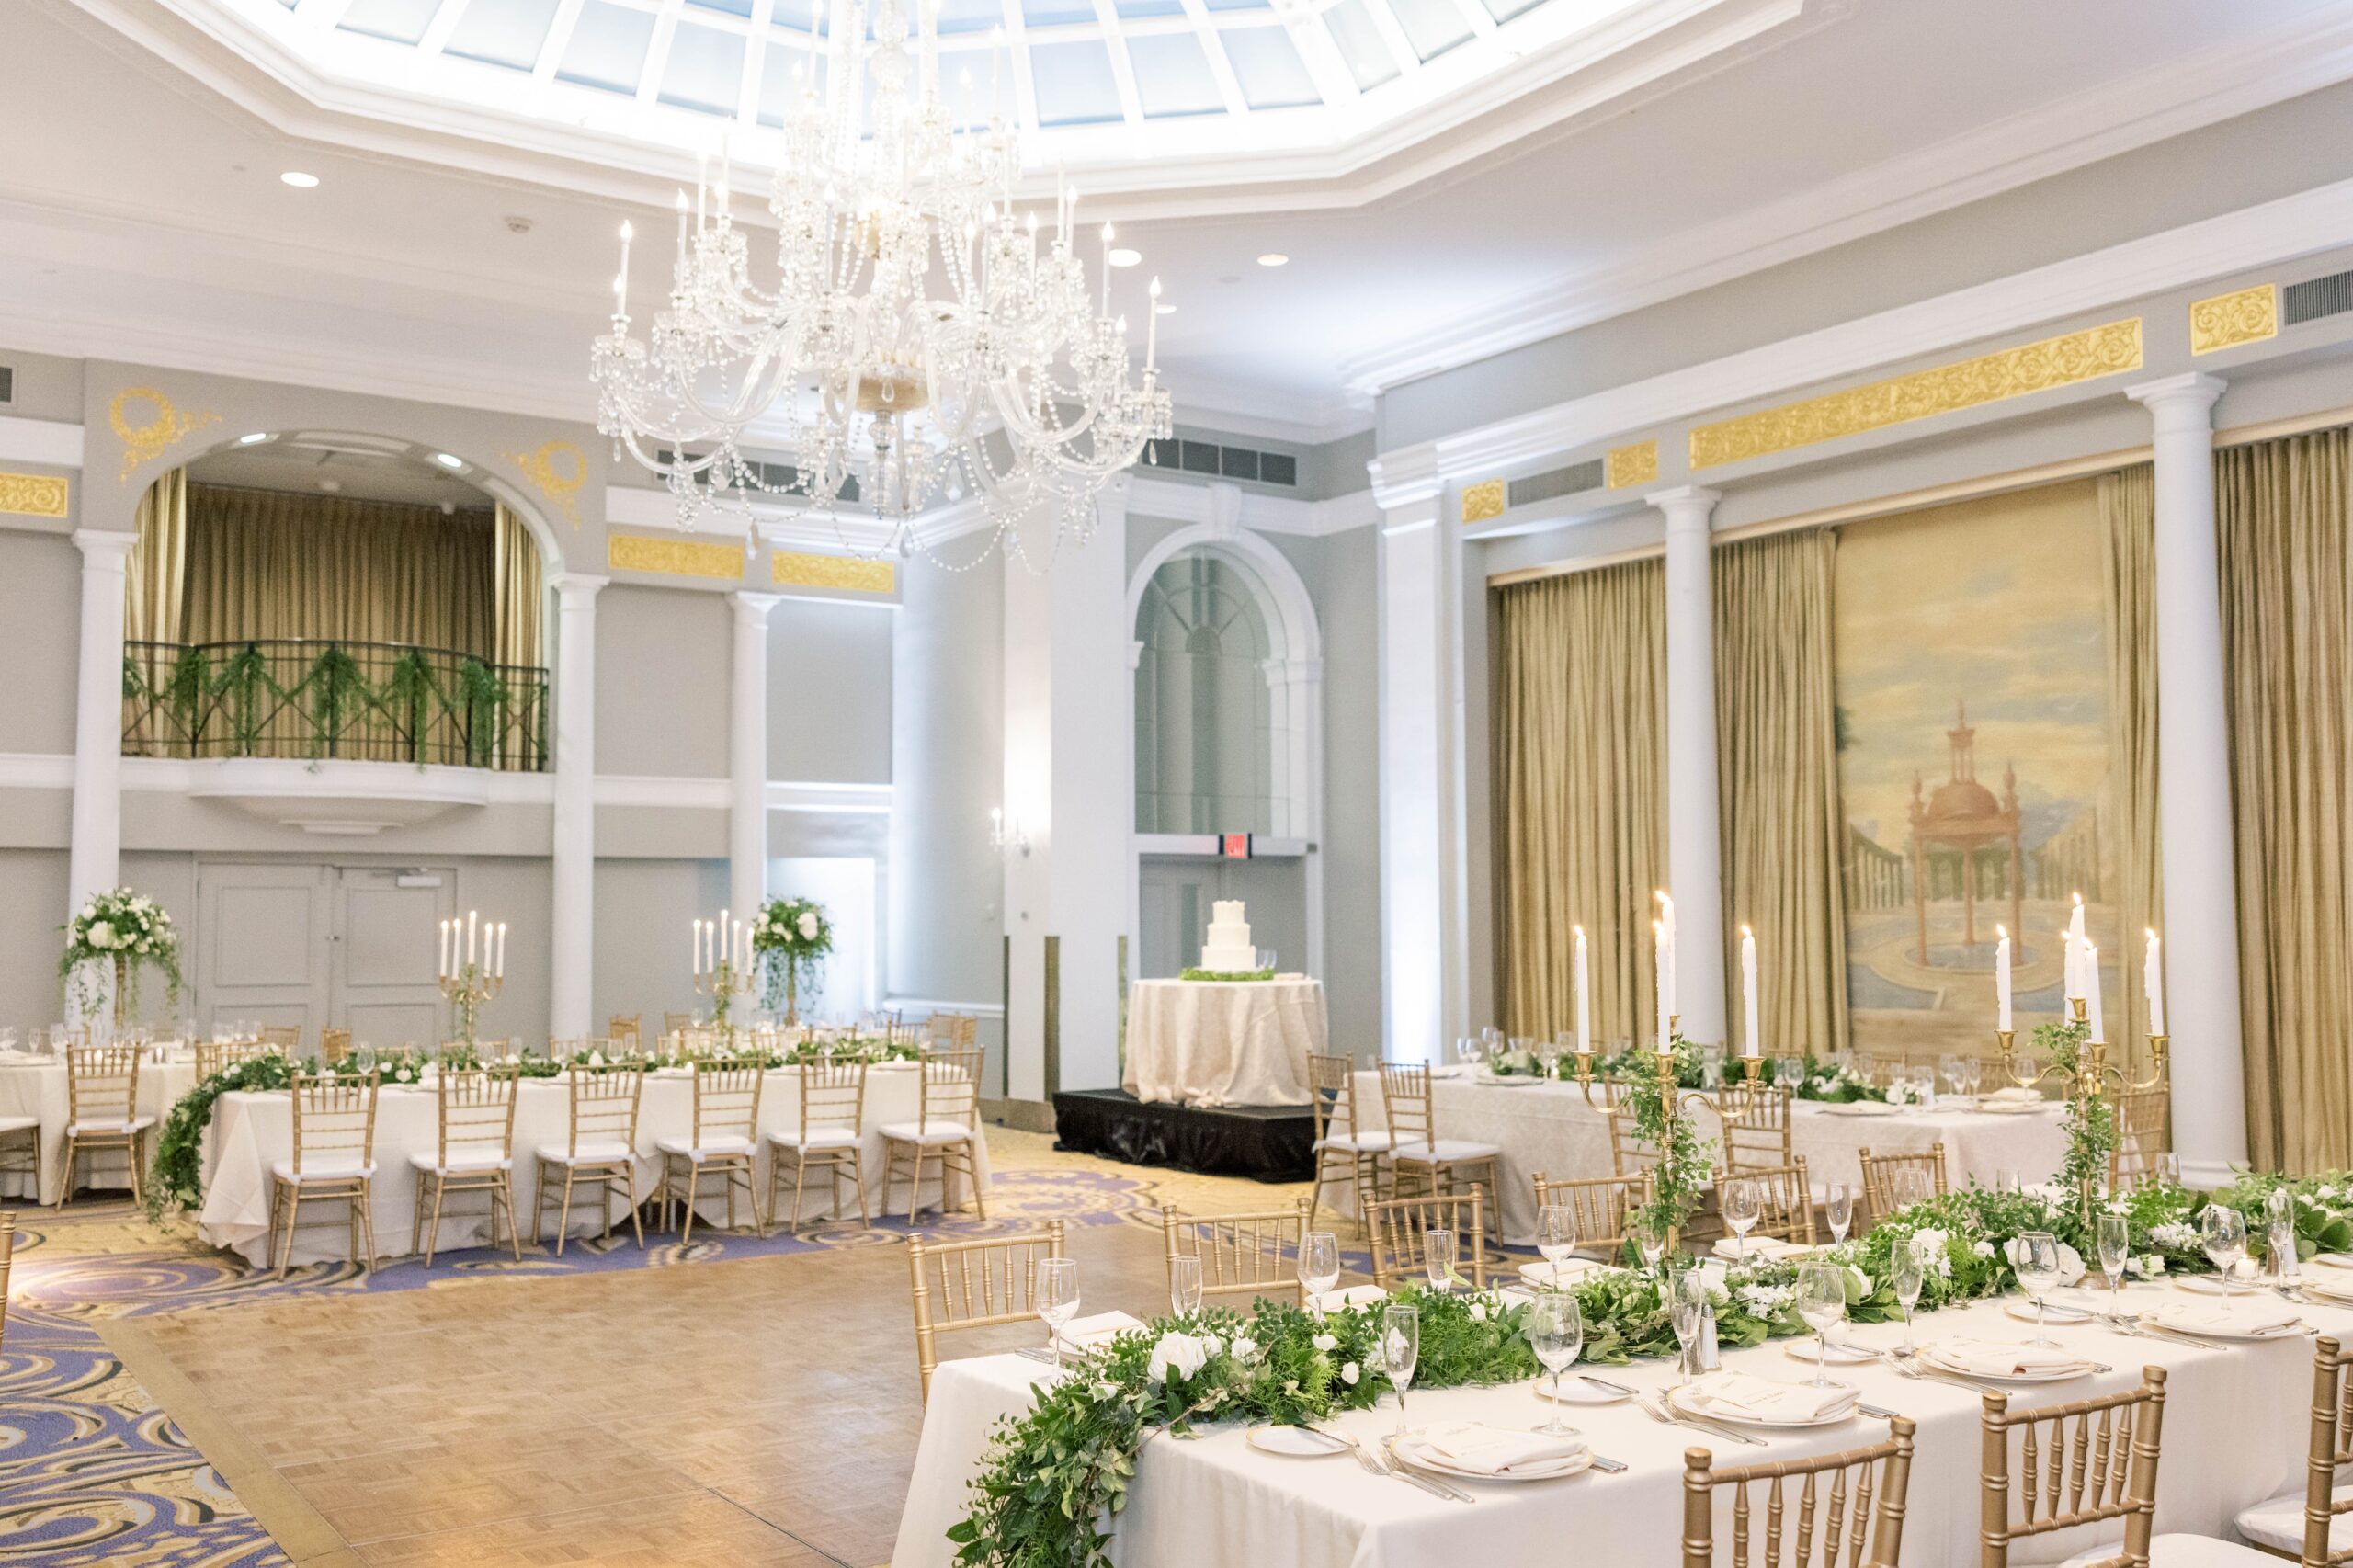 An intimate winter wedding in Washington, DC at the iconic St. Matthews Cathedral and Mayflower Hotel.